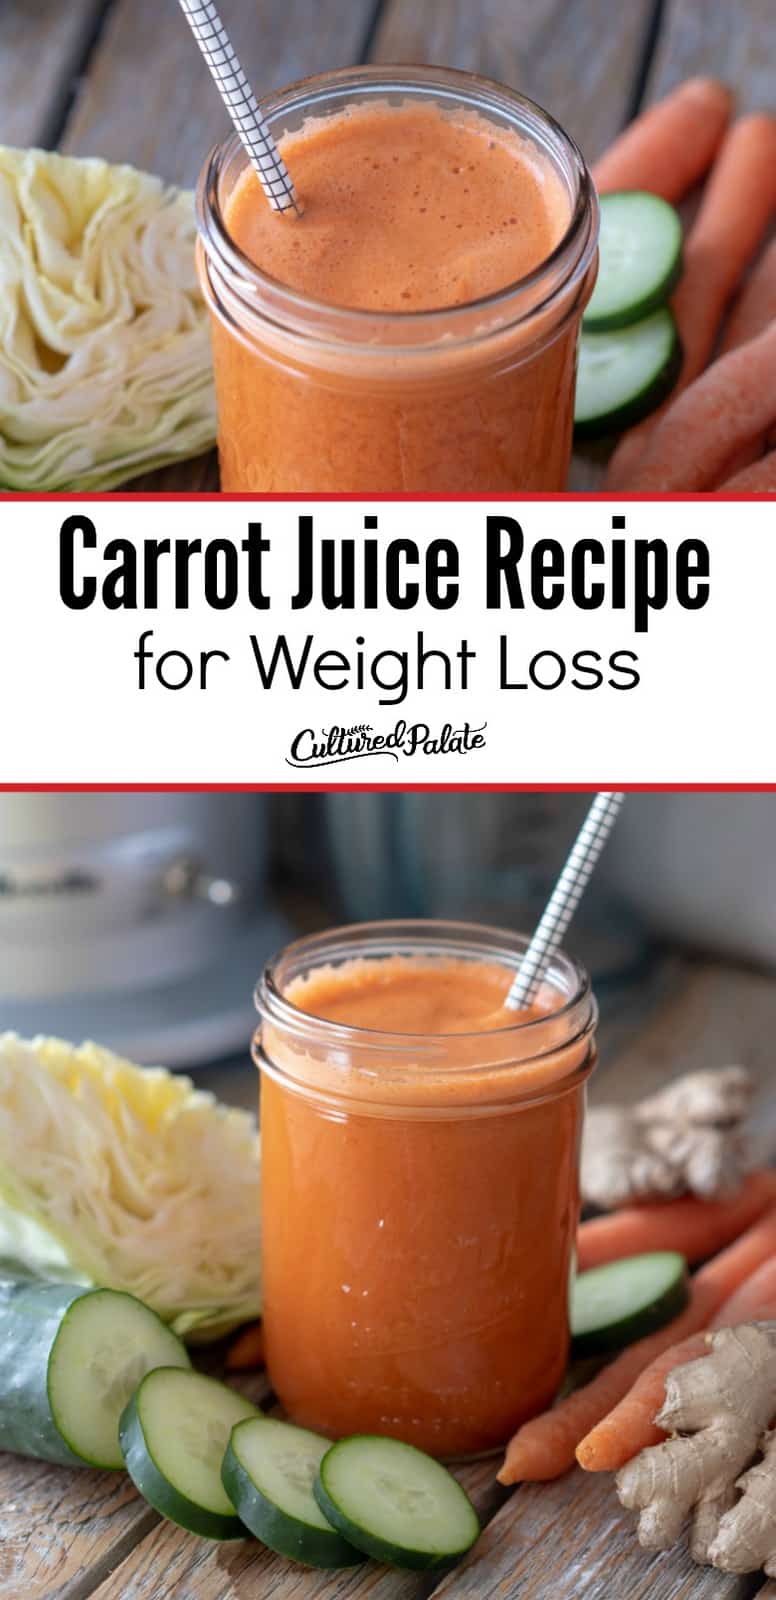 Carrot Juice Recipe for Weight Loss in glass jar shown in two images with text overlay.